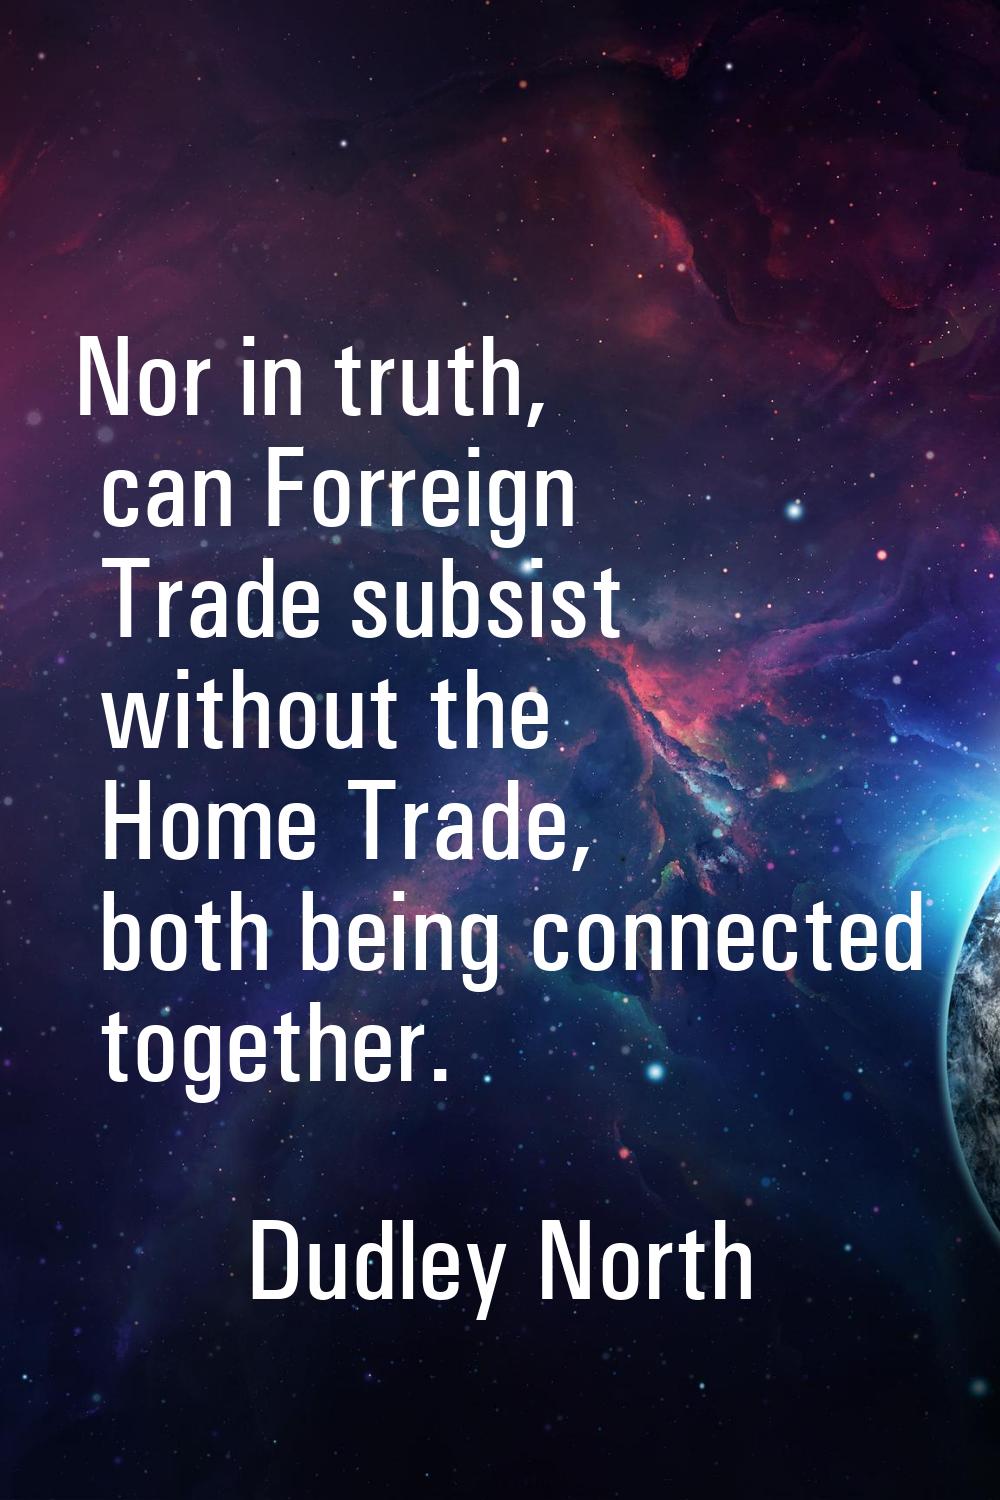 Nor in truth, can Forreign Trade subsist without the Home Trade, both being connected together.